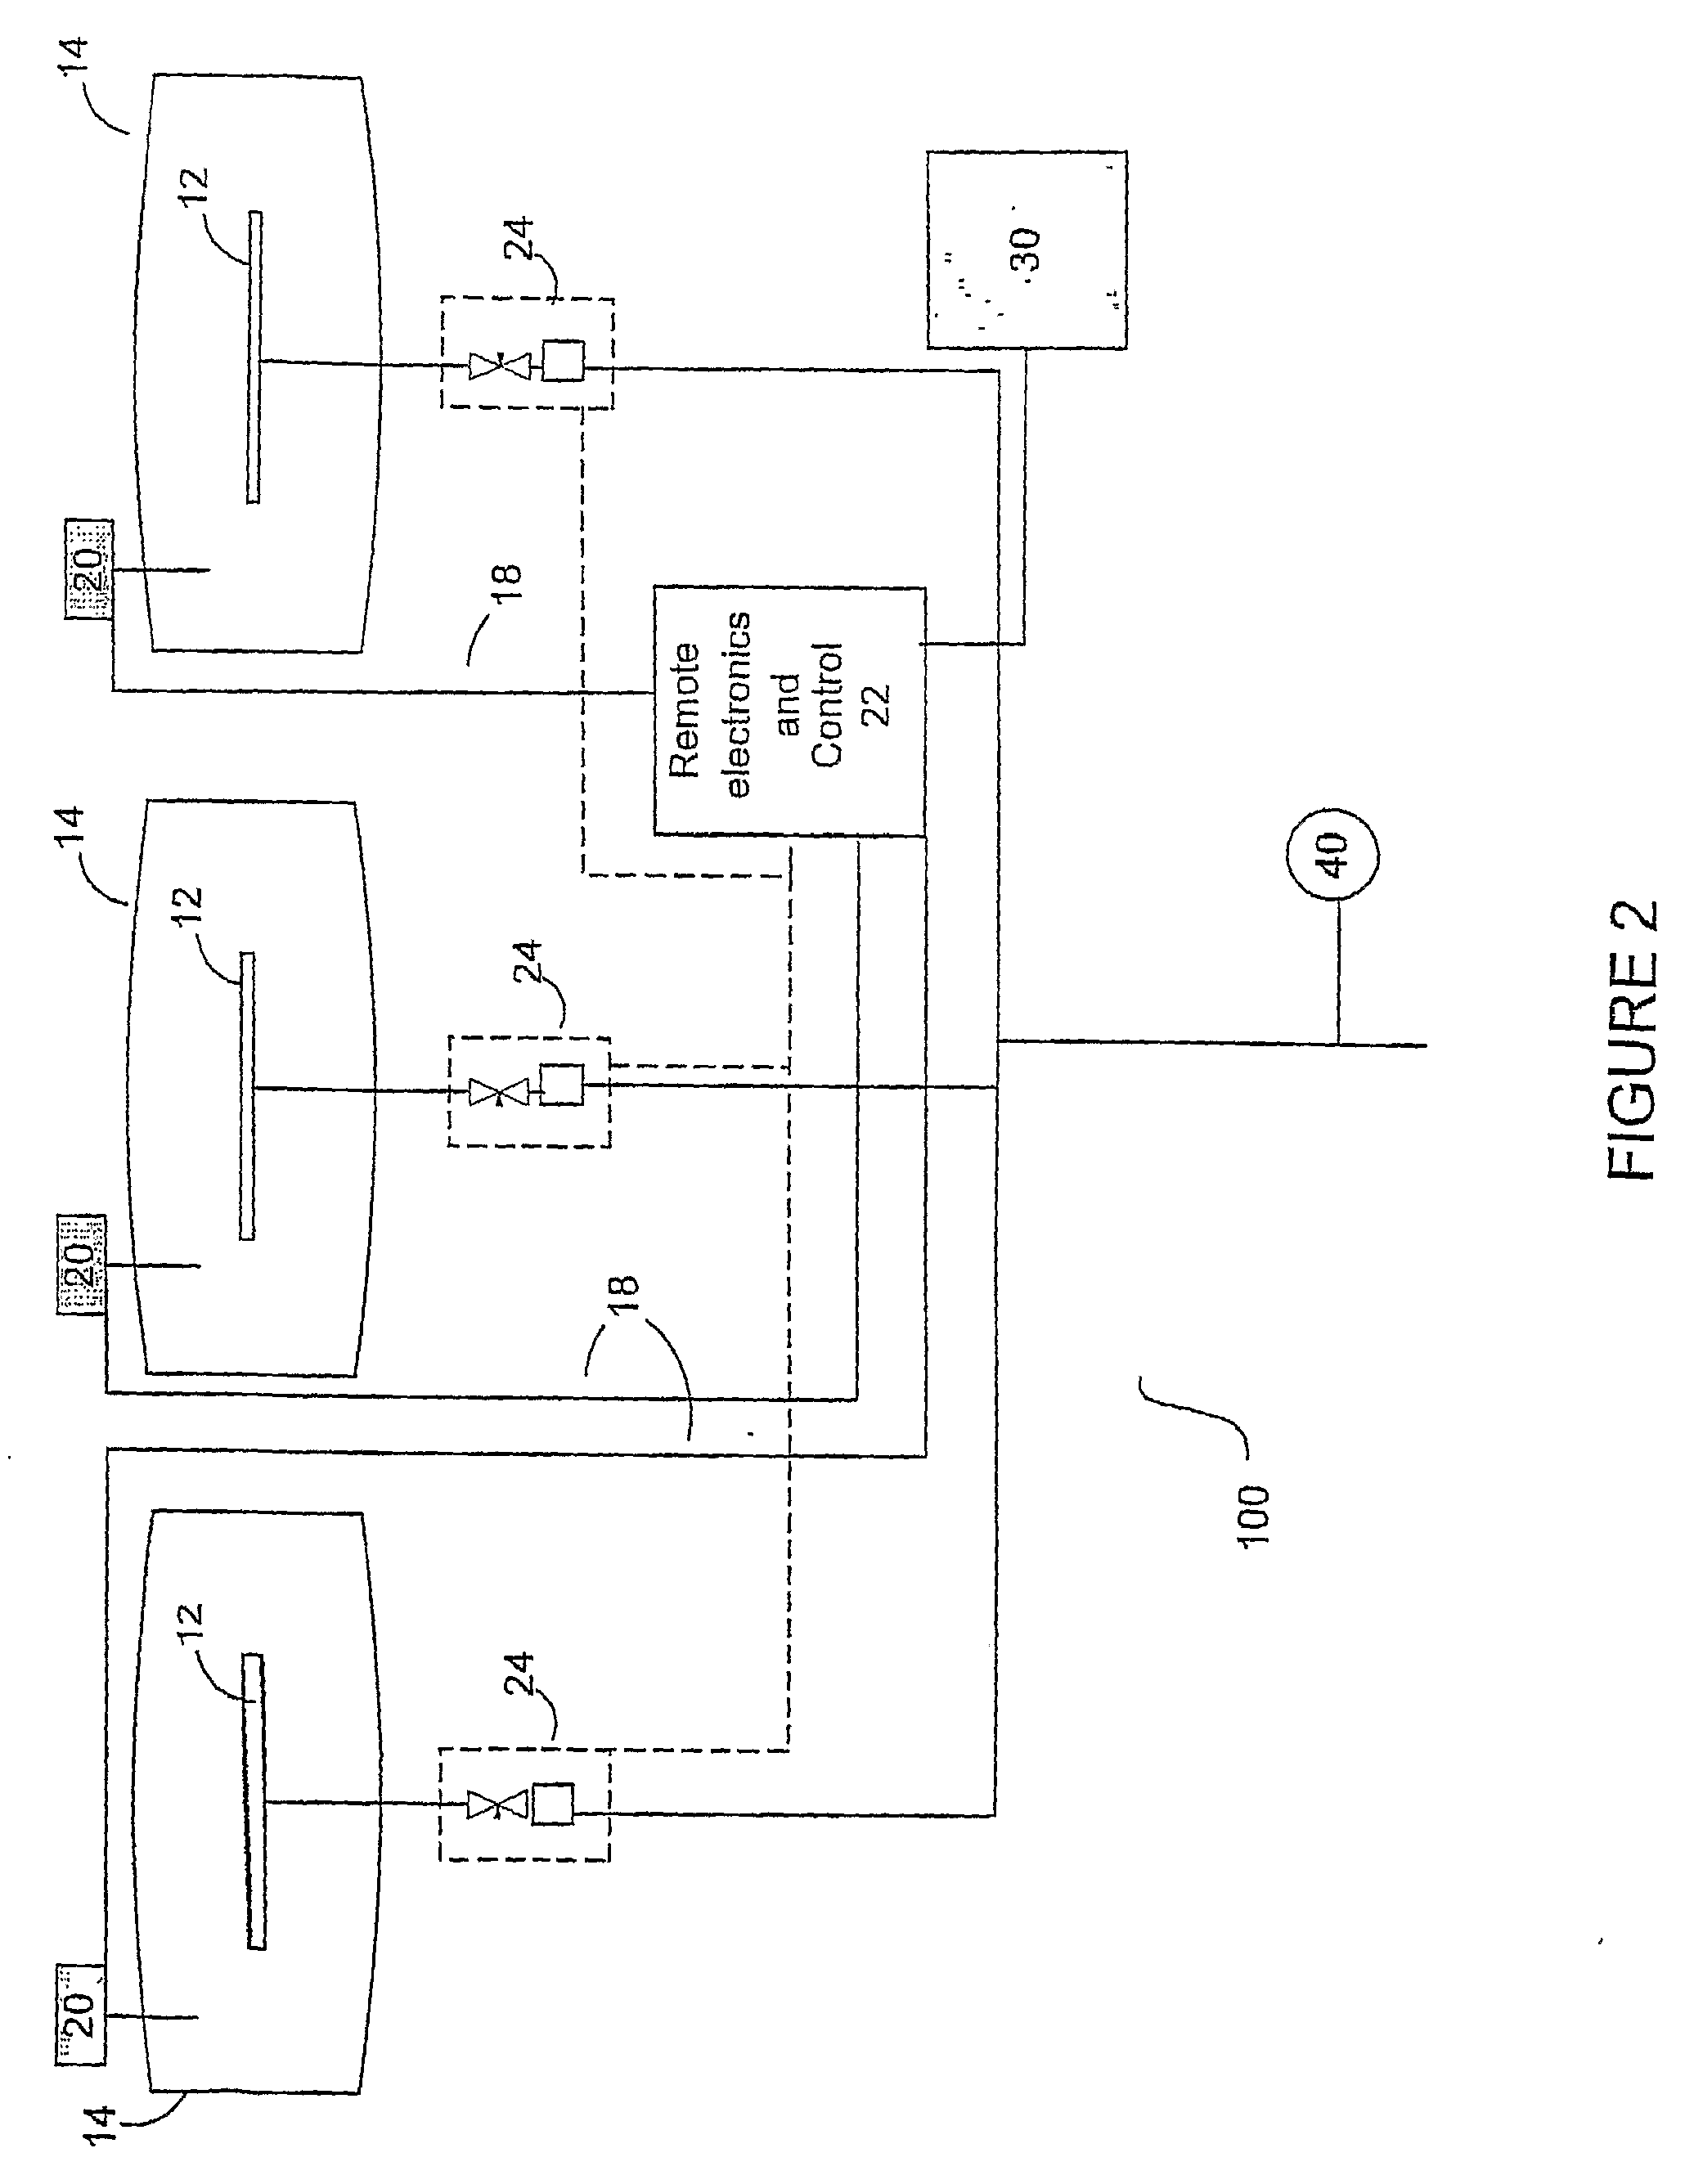 Method and System for Wafer Temperature Control